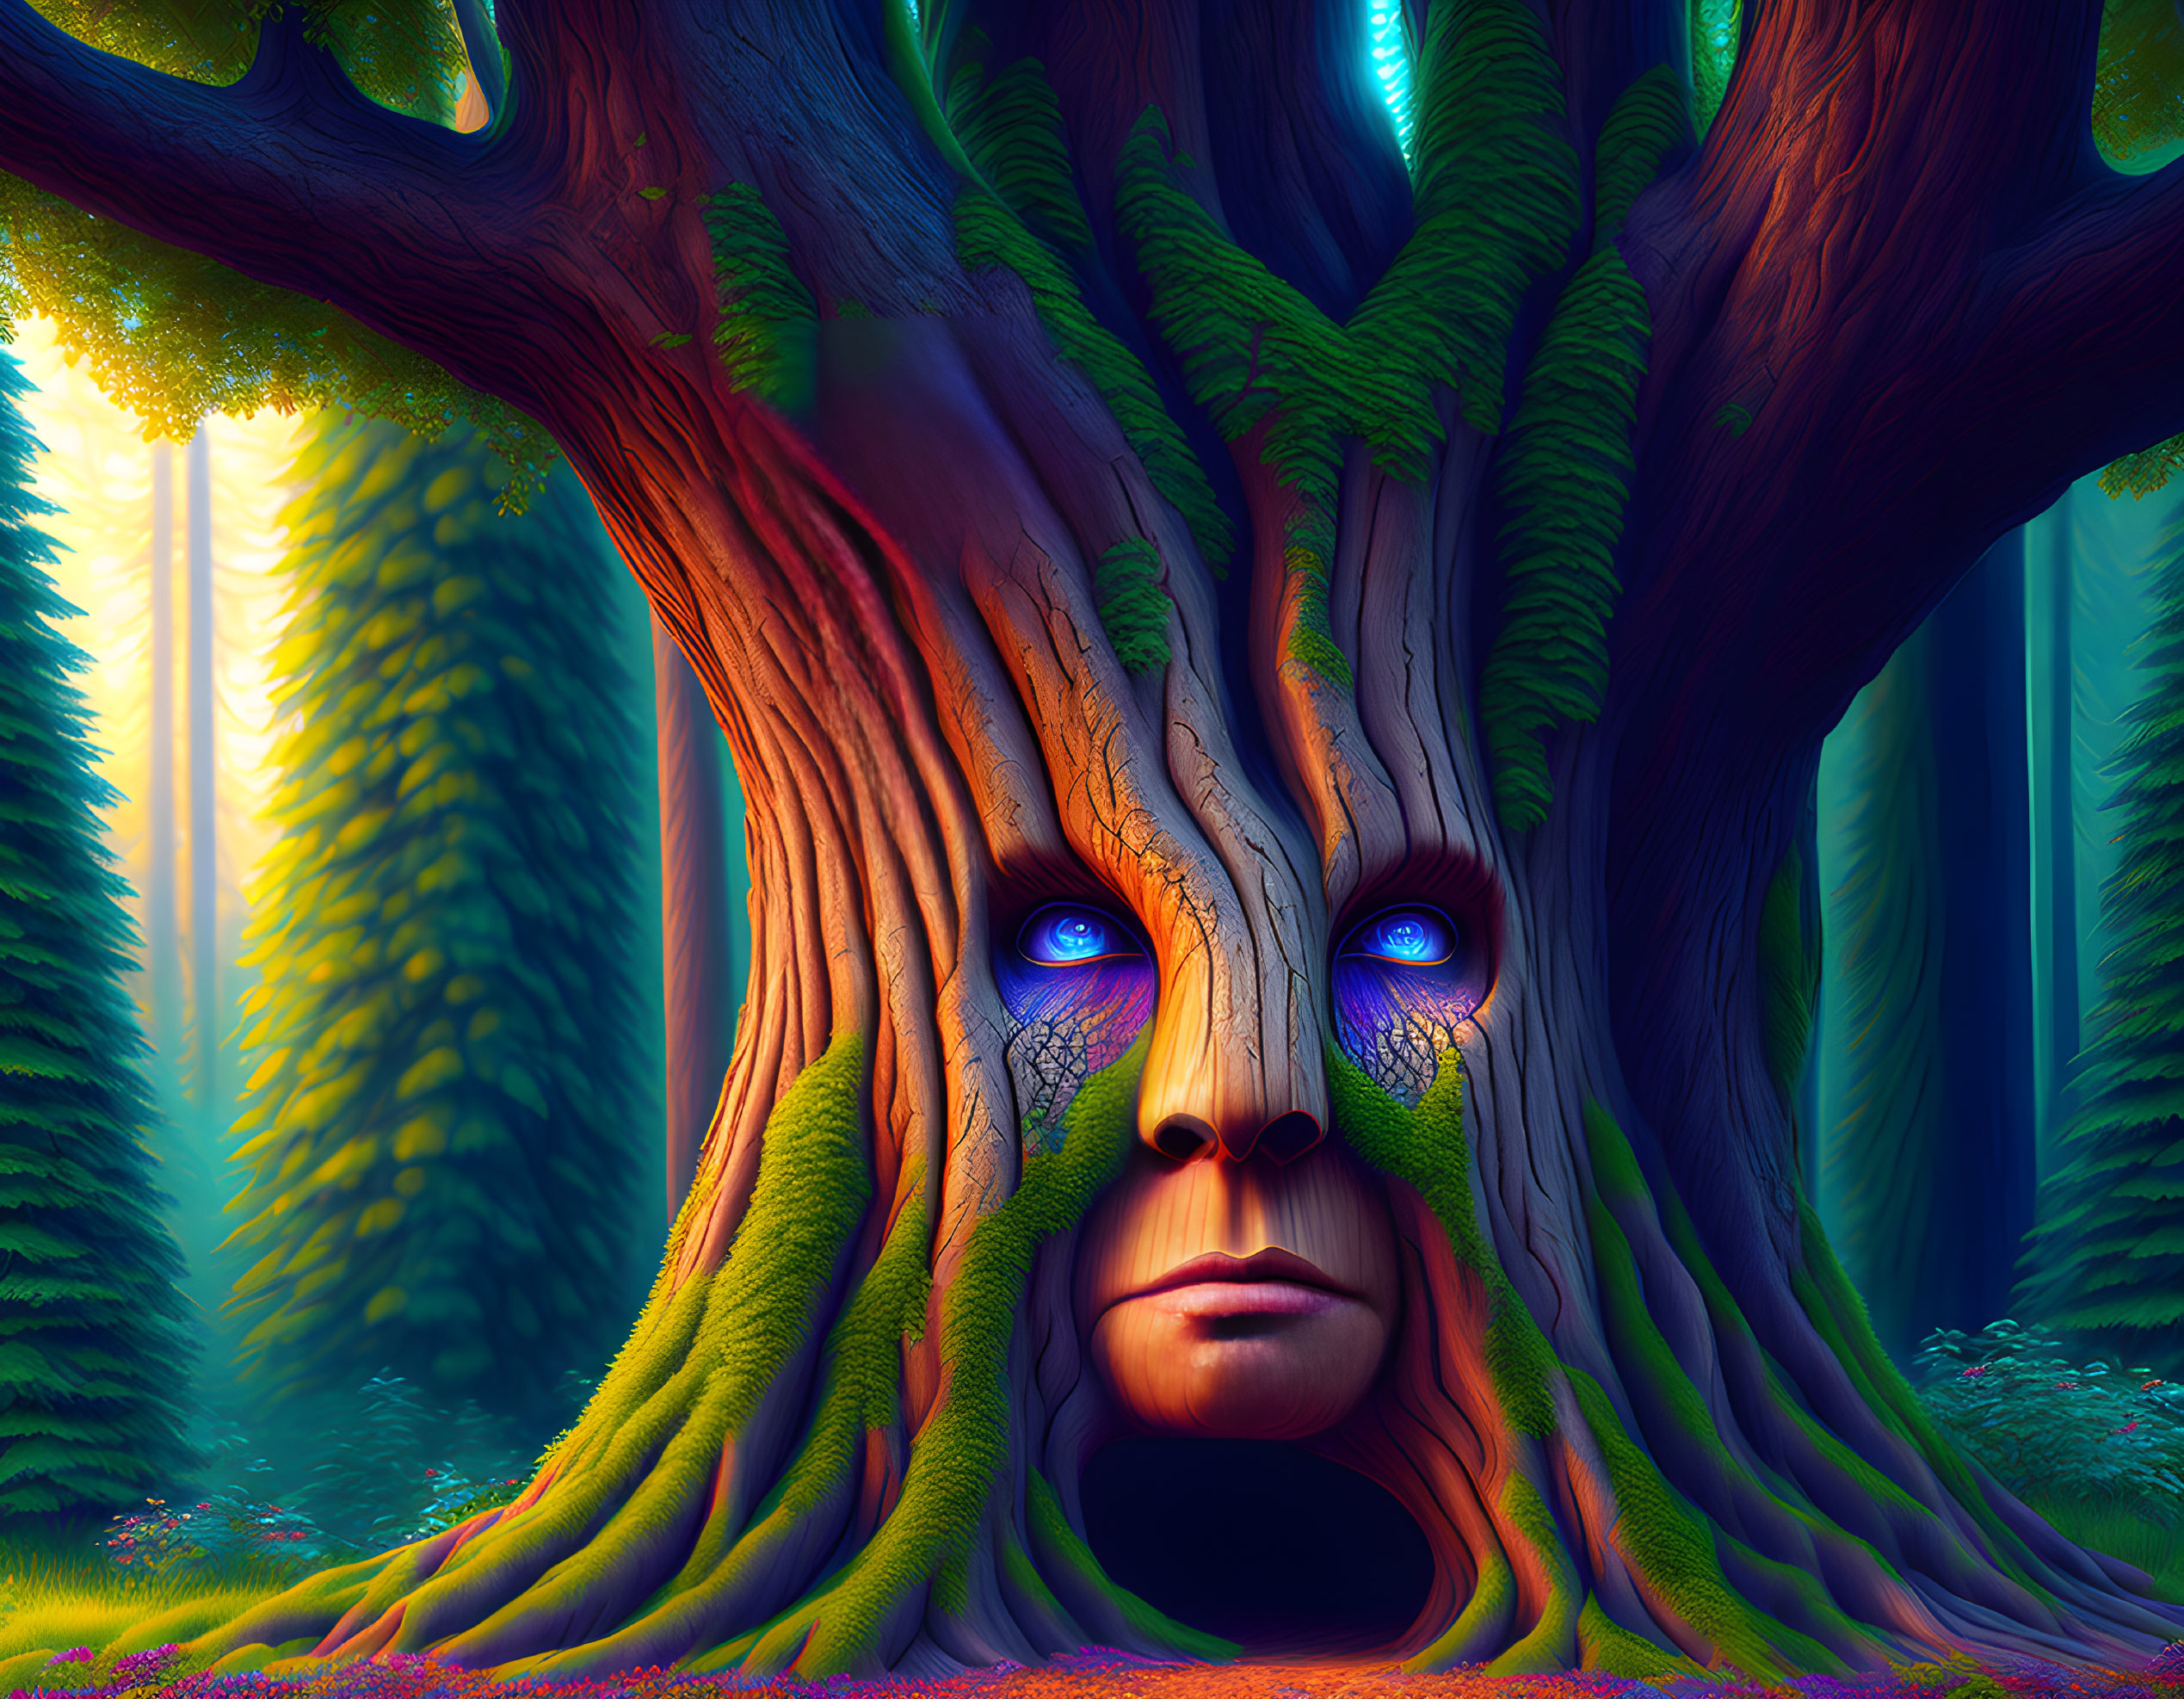 Enchanted forest scene with large tree and human-like face